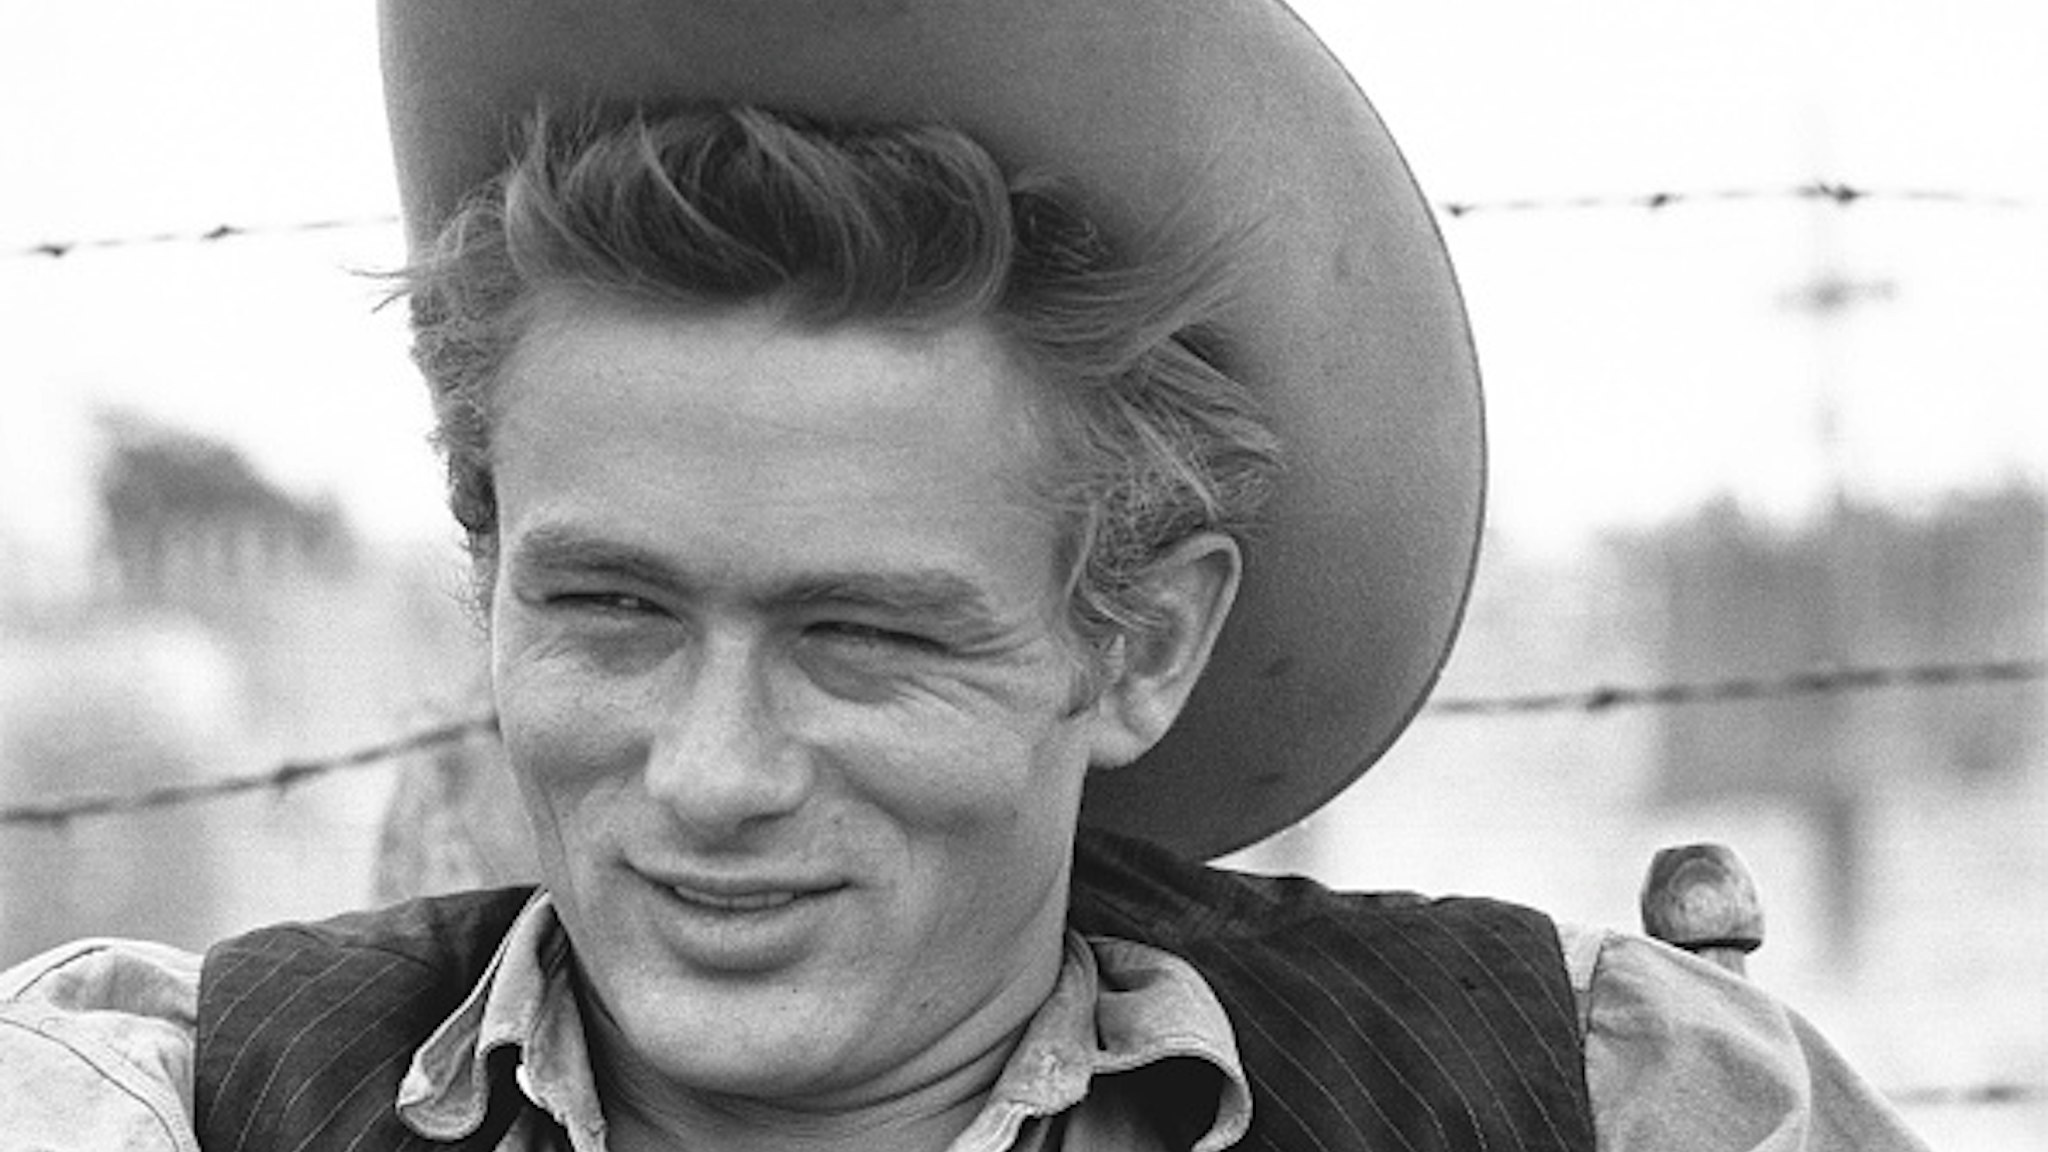 MARFA, TX - OCTOBER 1955: Actor James Dean on the set of the movie "Giant" in October 1955 in Marfa, Texas.